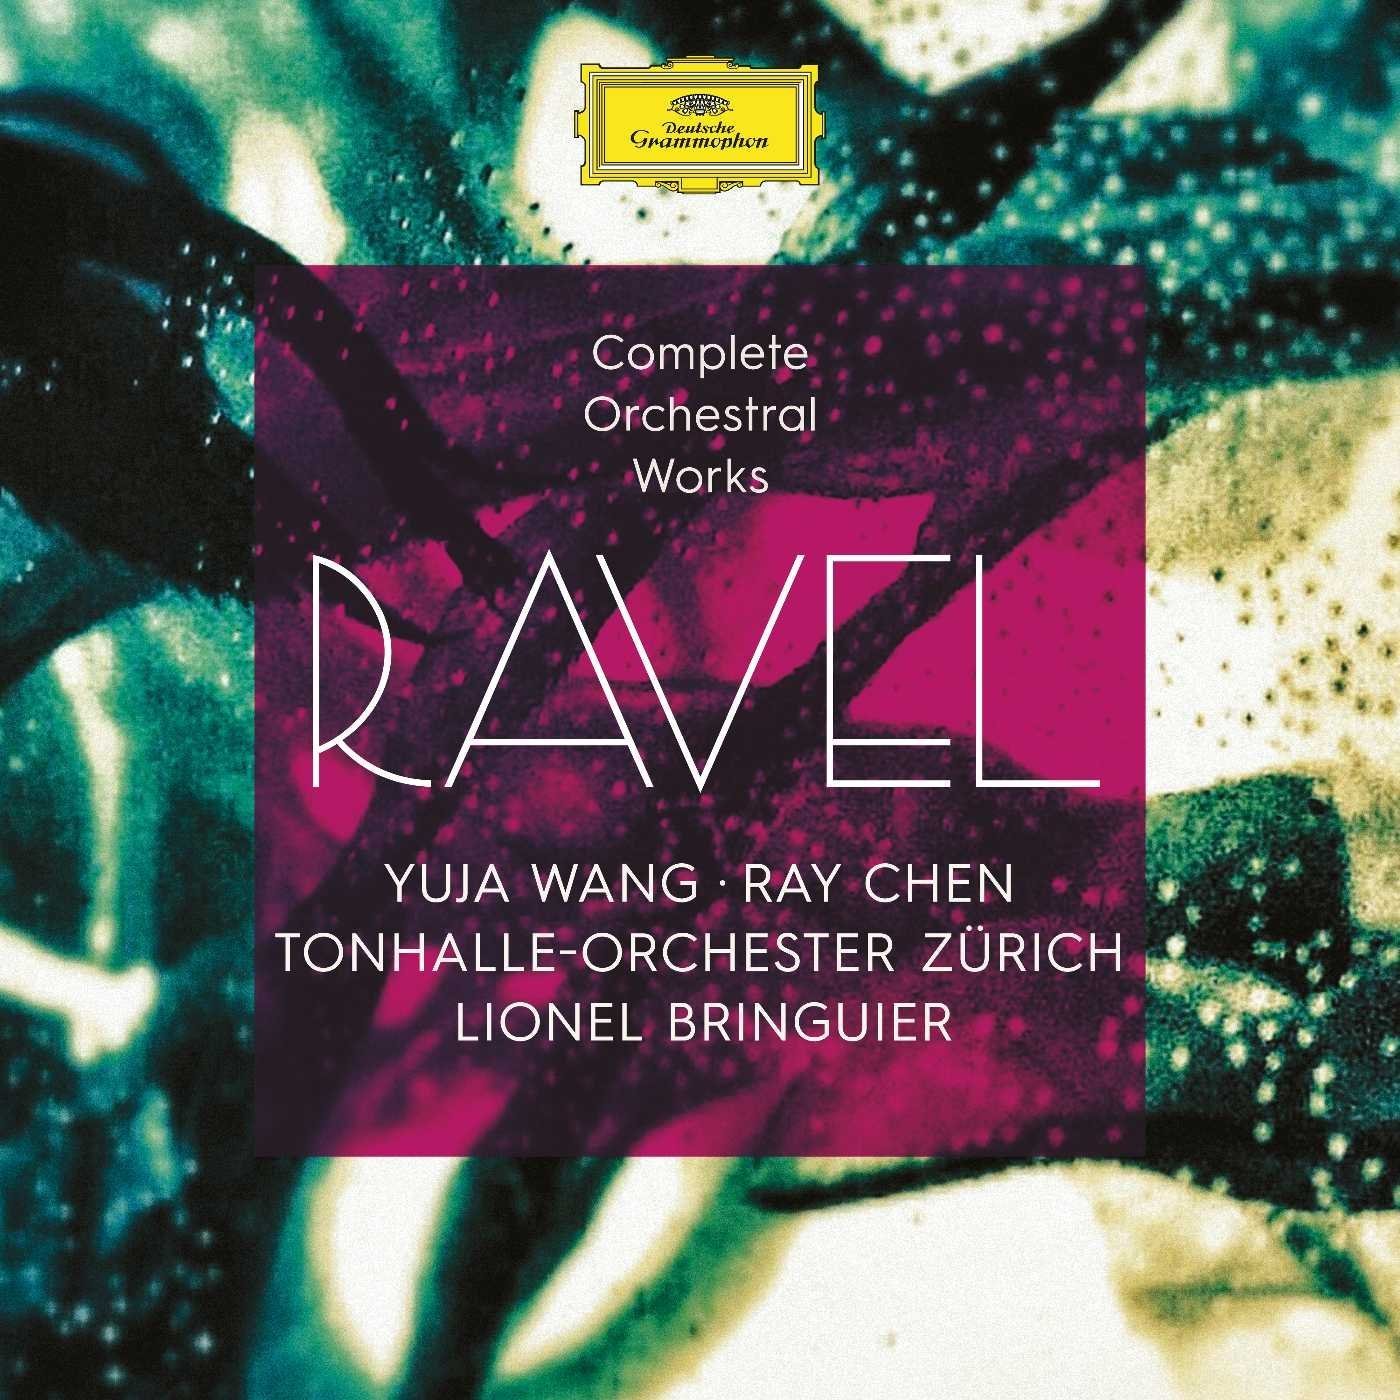 Ravel: Complete Orchestral Works | Yuja Wang, Ray Chen, Tonhalle-Orchester Zurich, Lionel Bringuier